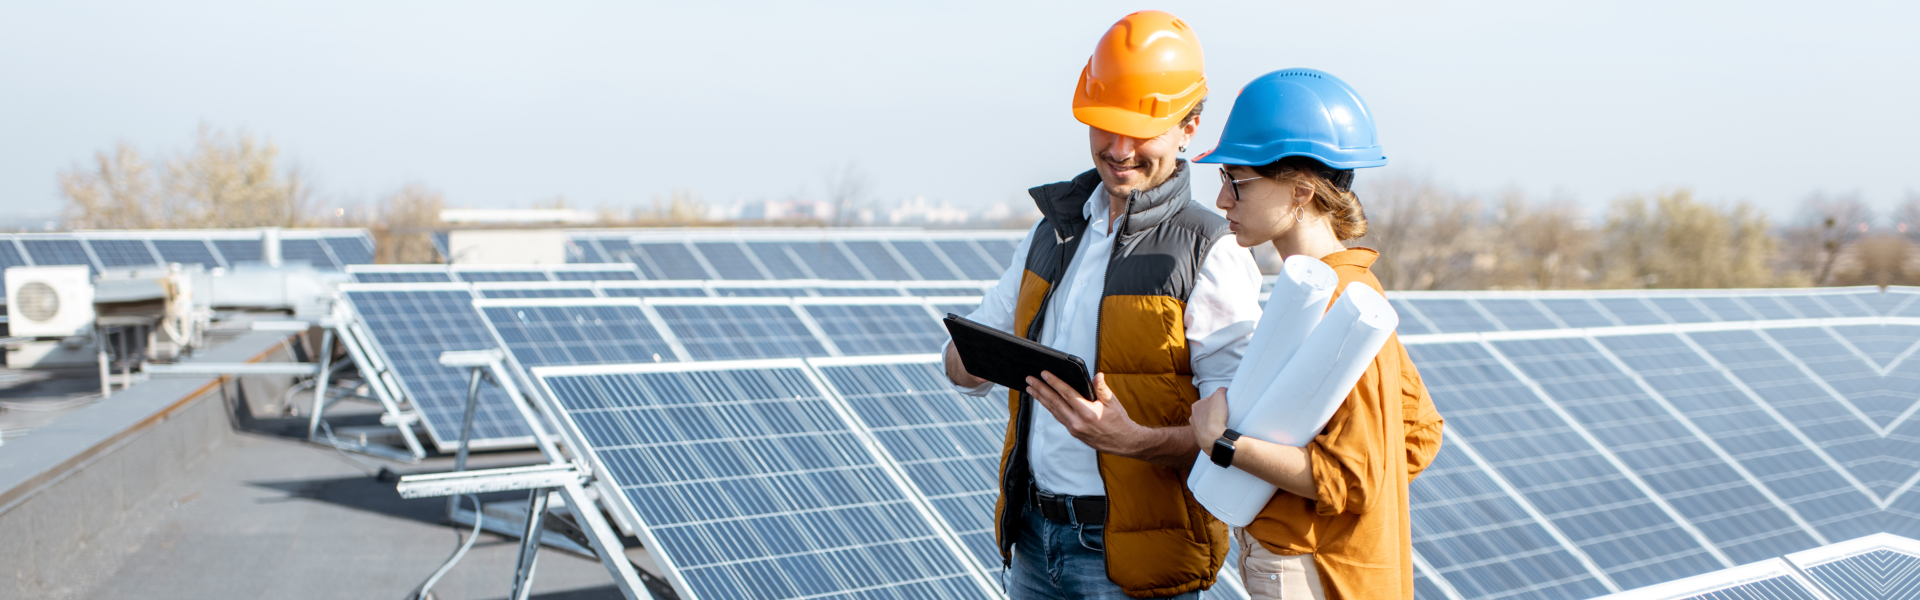 Two engineers or architects examining the construction of a solar power plant